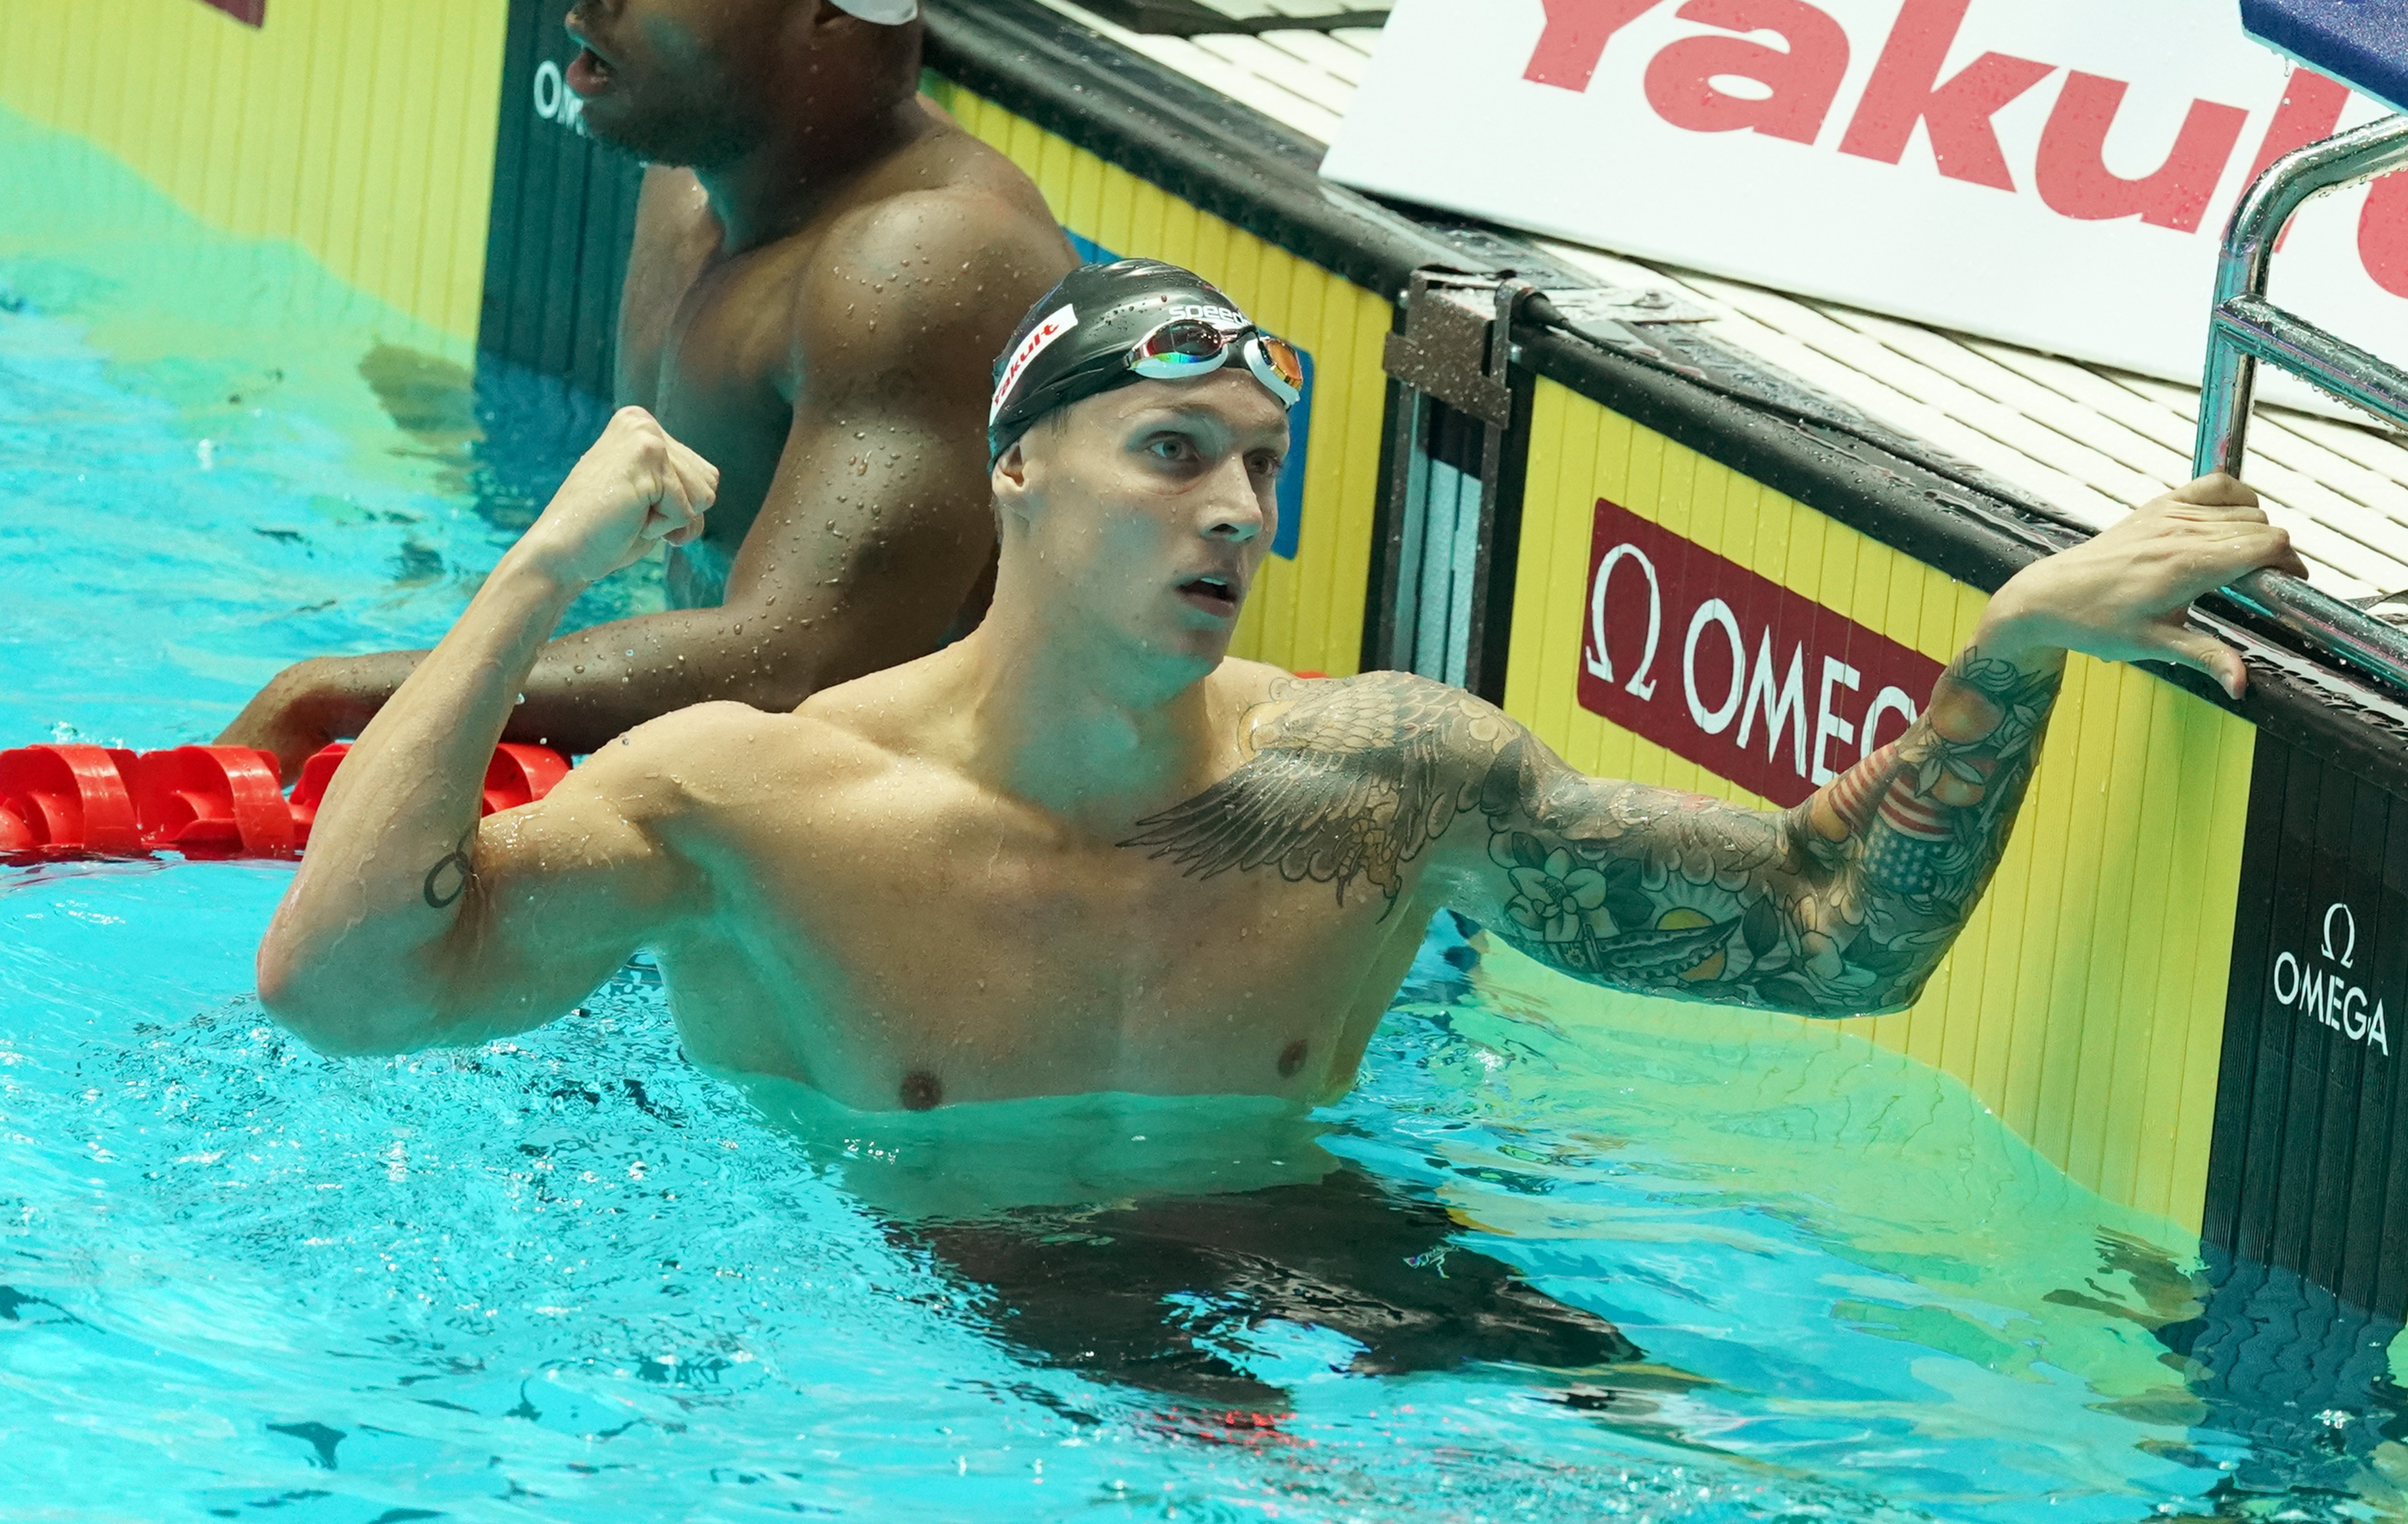 epa07741905 Caeleb Dressel of the United States of America (USA) celebrates a New World Record after competing in the men's 100m Butterfly during the Swimming events at the Gwangju 2019 FINA World Championships, Gwangju, South Korea, 26 July 2019.  EPA/ANTONIO BAT